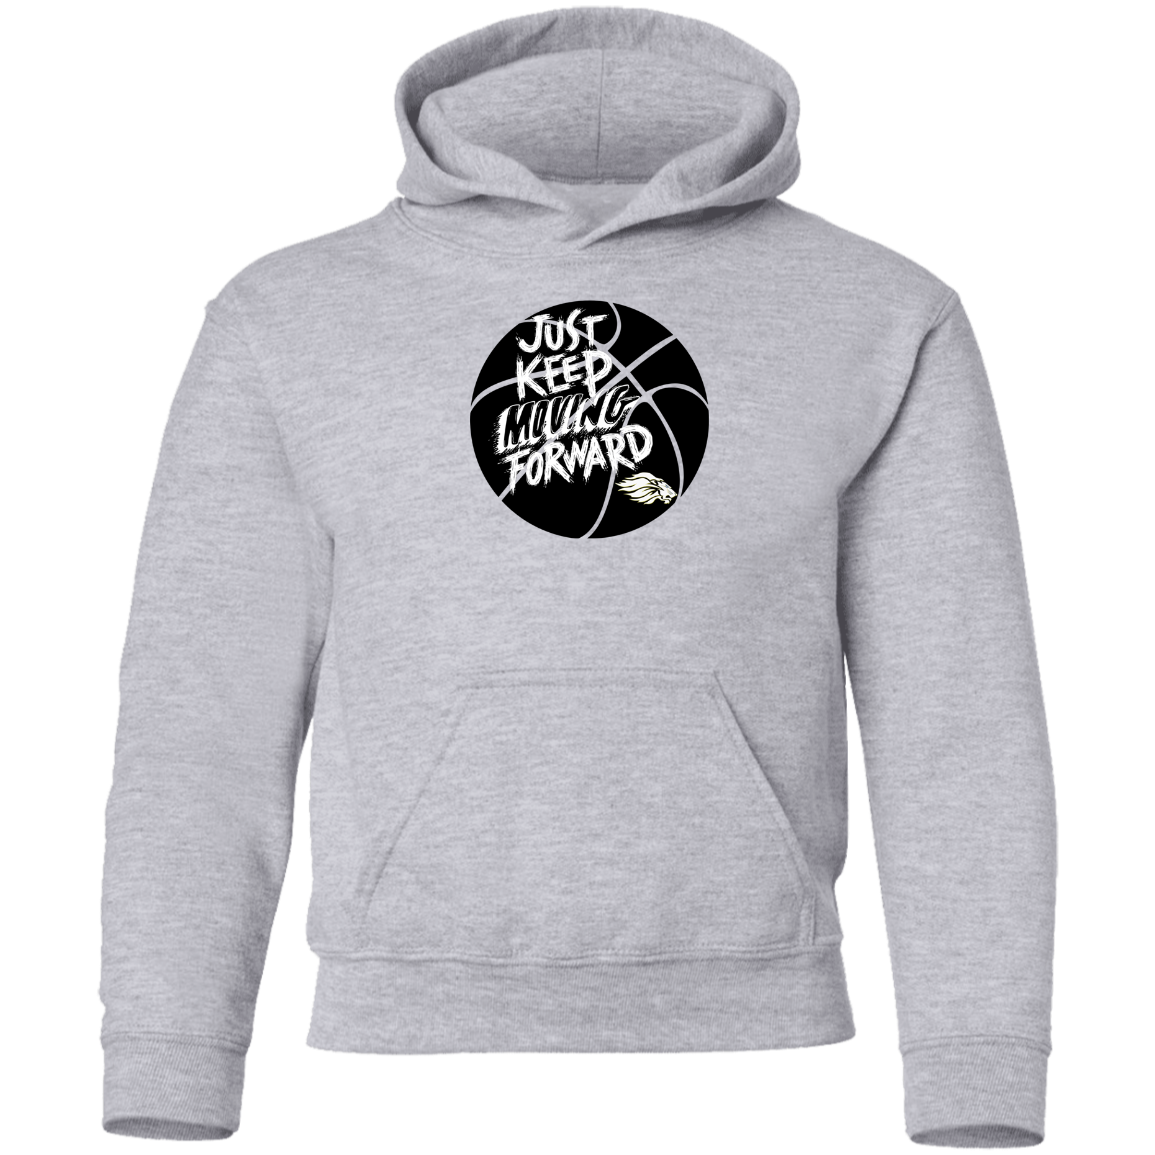 Just Keep Moving Forward- Youth Pullover Hoodie